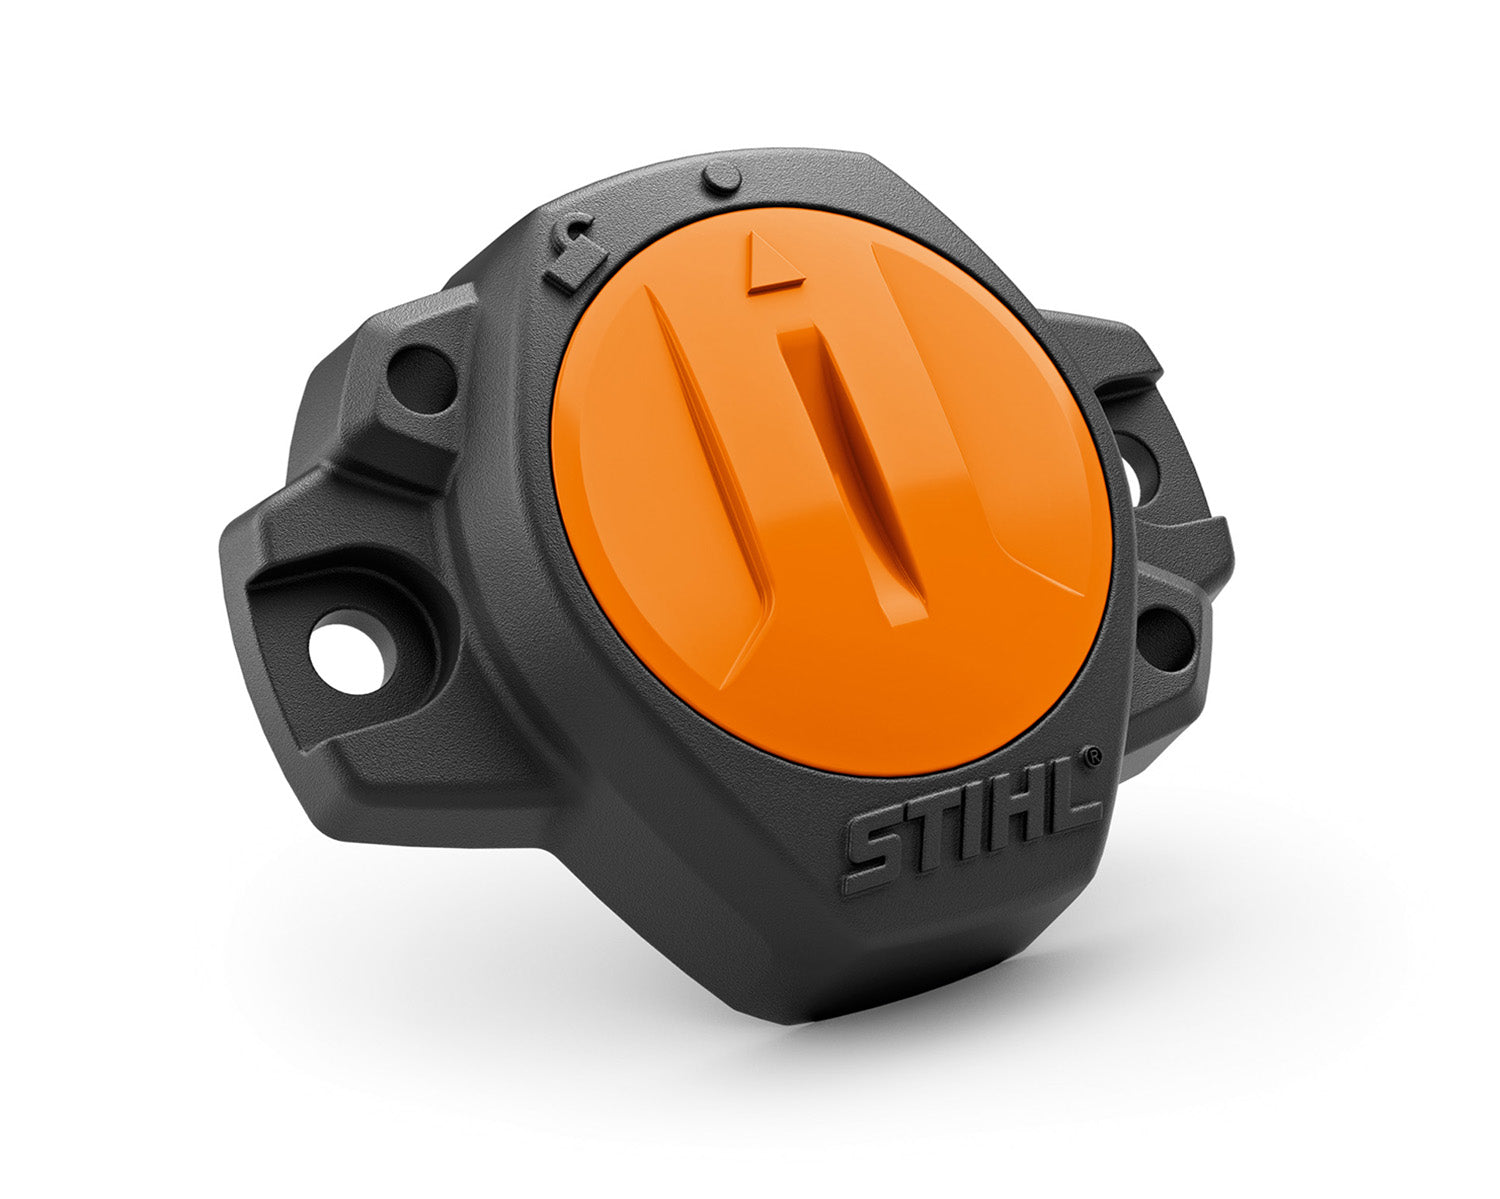 Extend your Professional Use Warranty with a STIHL Smart Connector